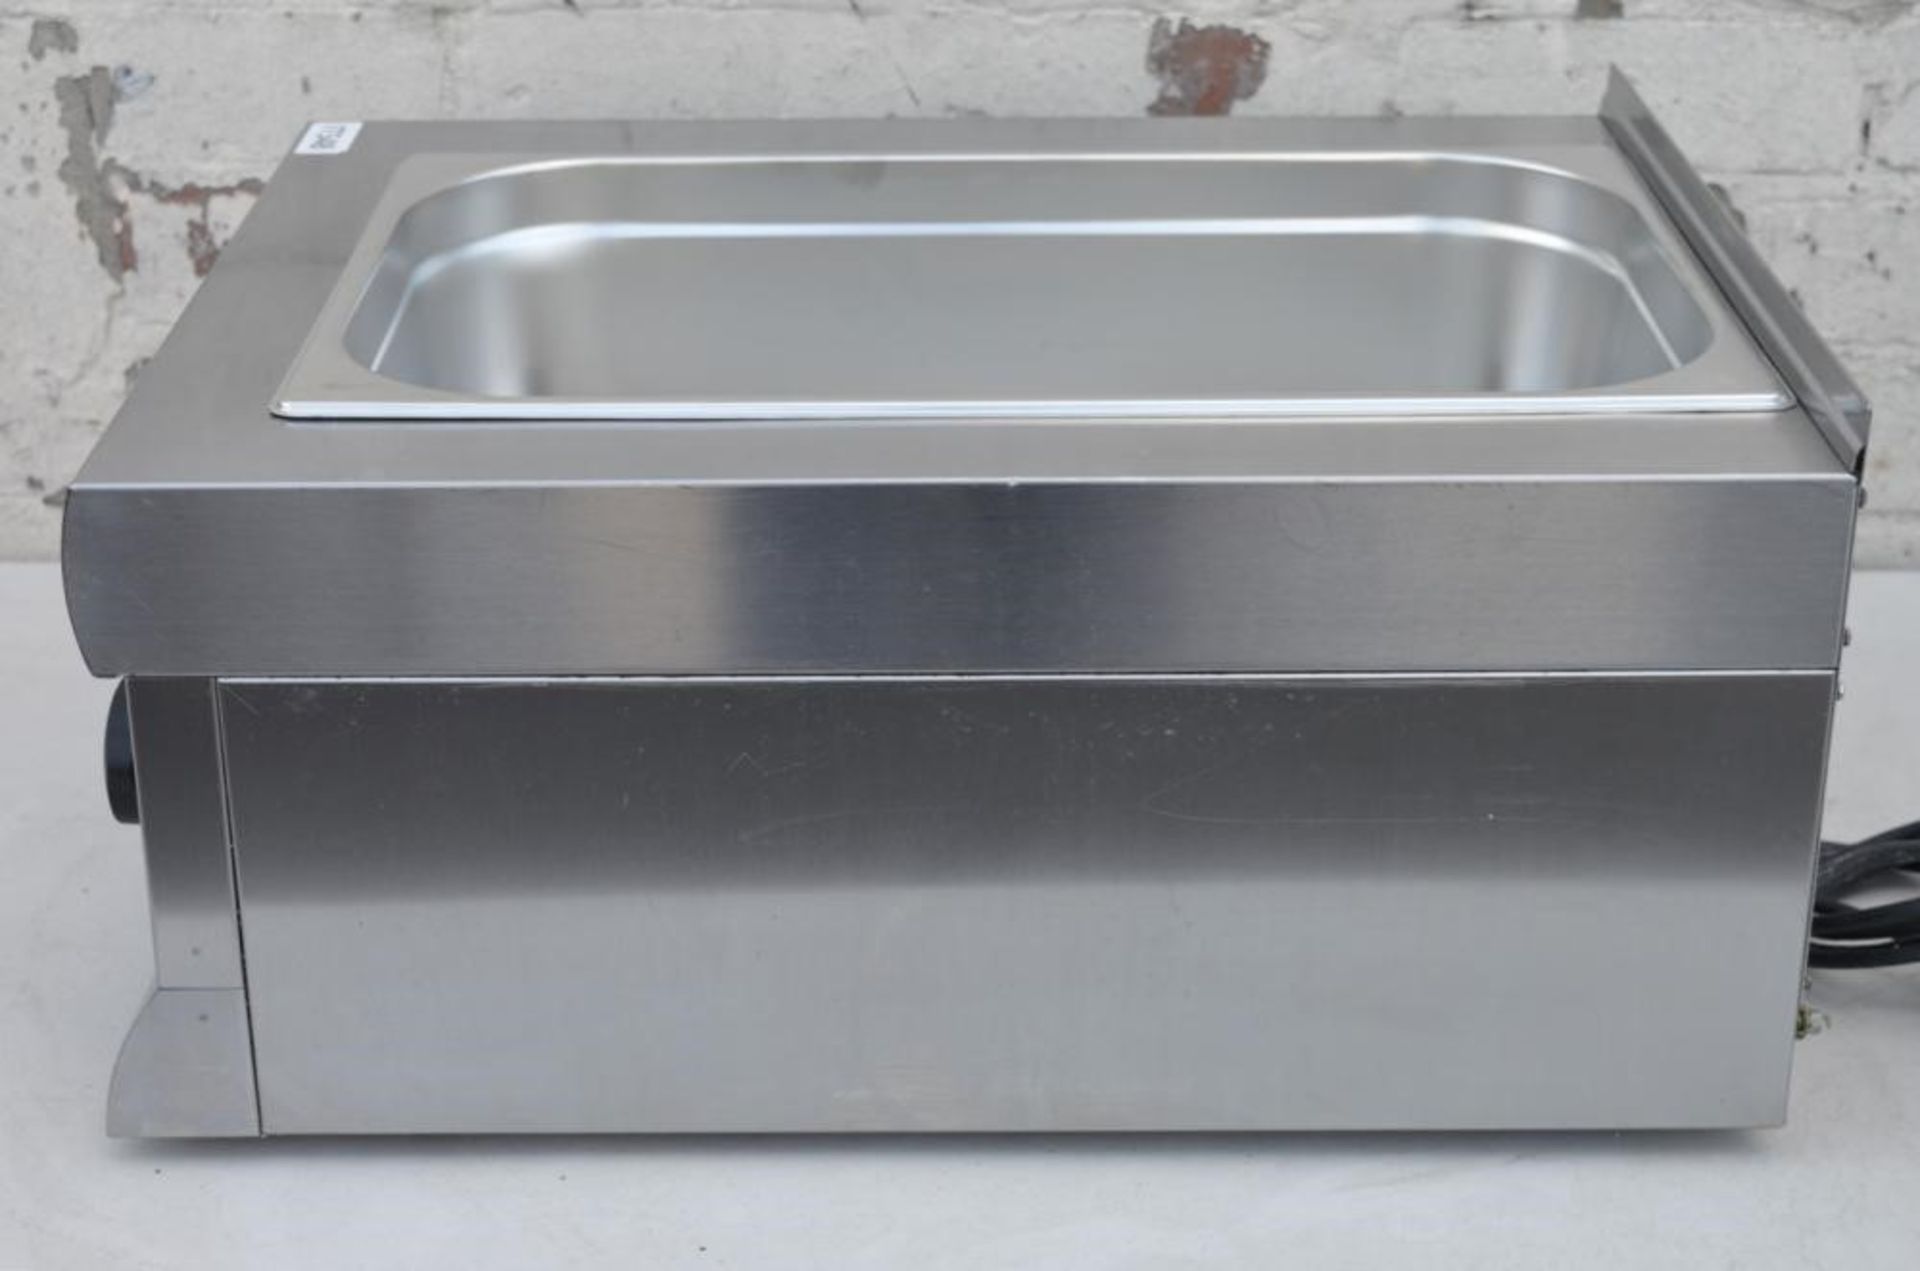 1 x LINCAT Commercial Bain Marie (BM4) - Made In UK - Stainless Steel Finish - Ref: IT548 - CL232 - - Image 7 of 9